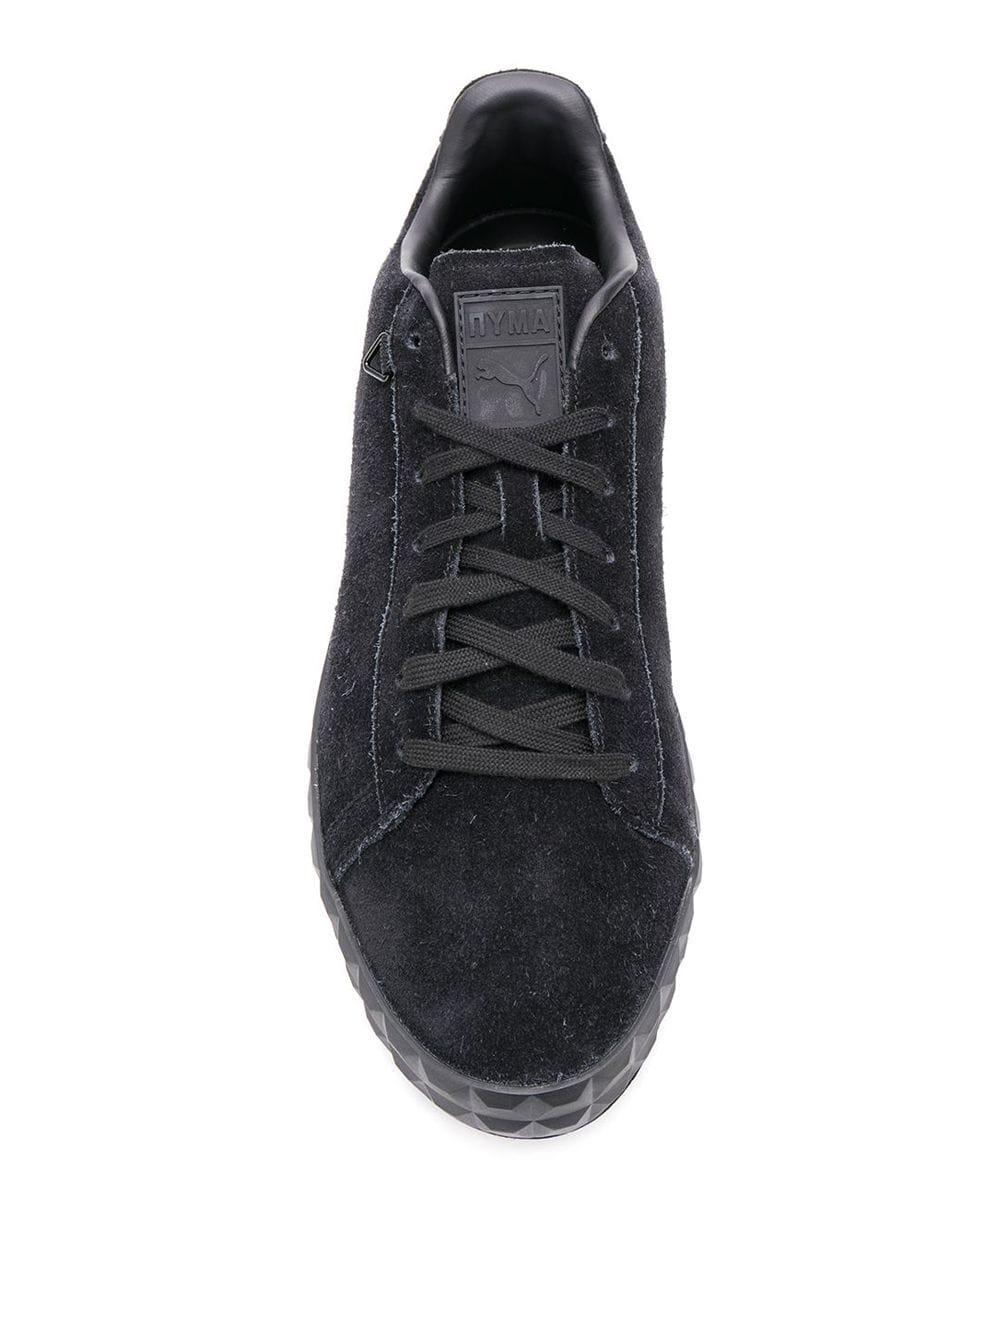 PUMA X Aytao | Outlaw Moscow Court Platform Sneakers in Black for Men |  Lyst UK